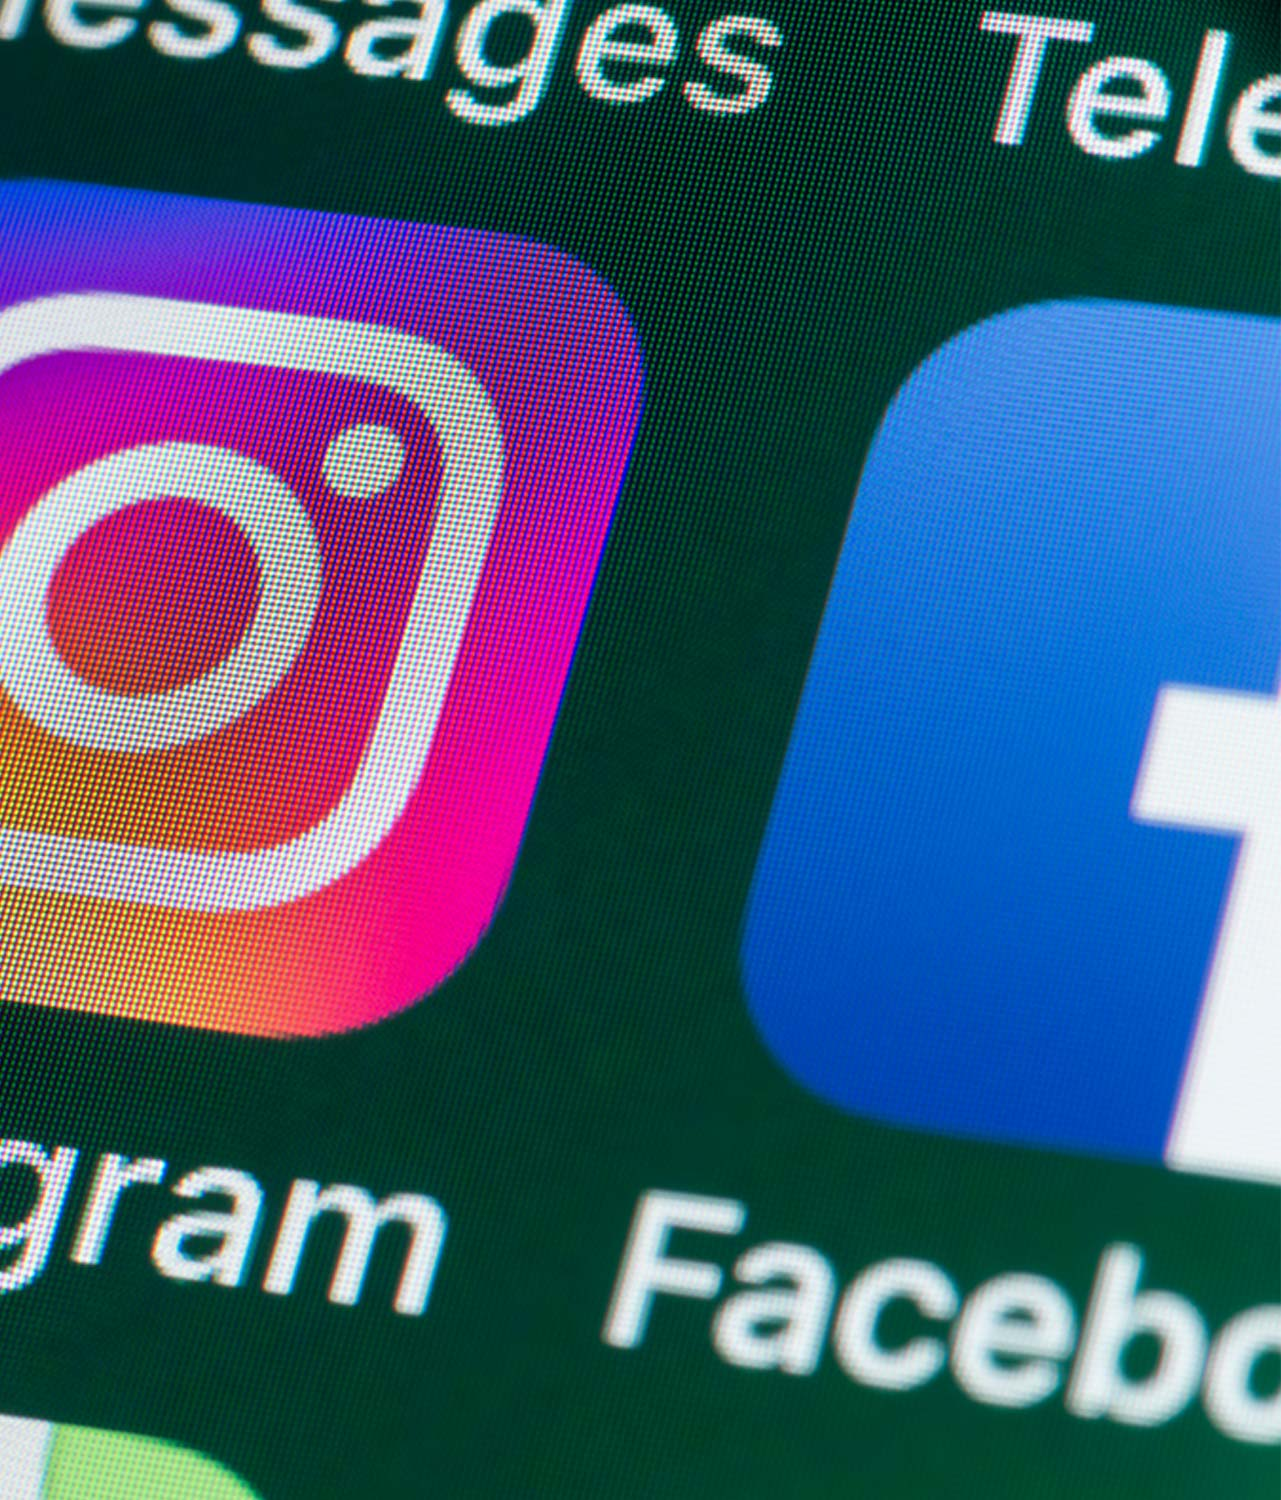 What likely caused the global Facebook, Instagram and WhatsApp outage